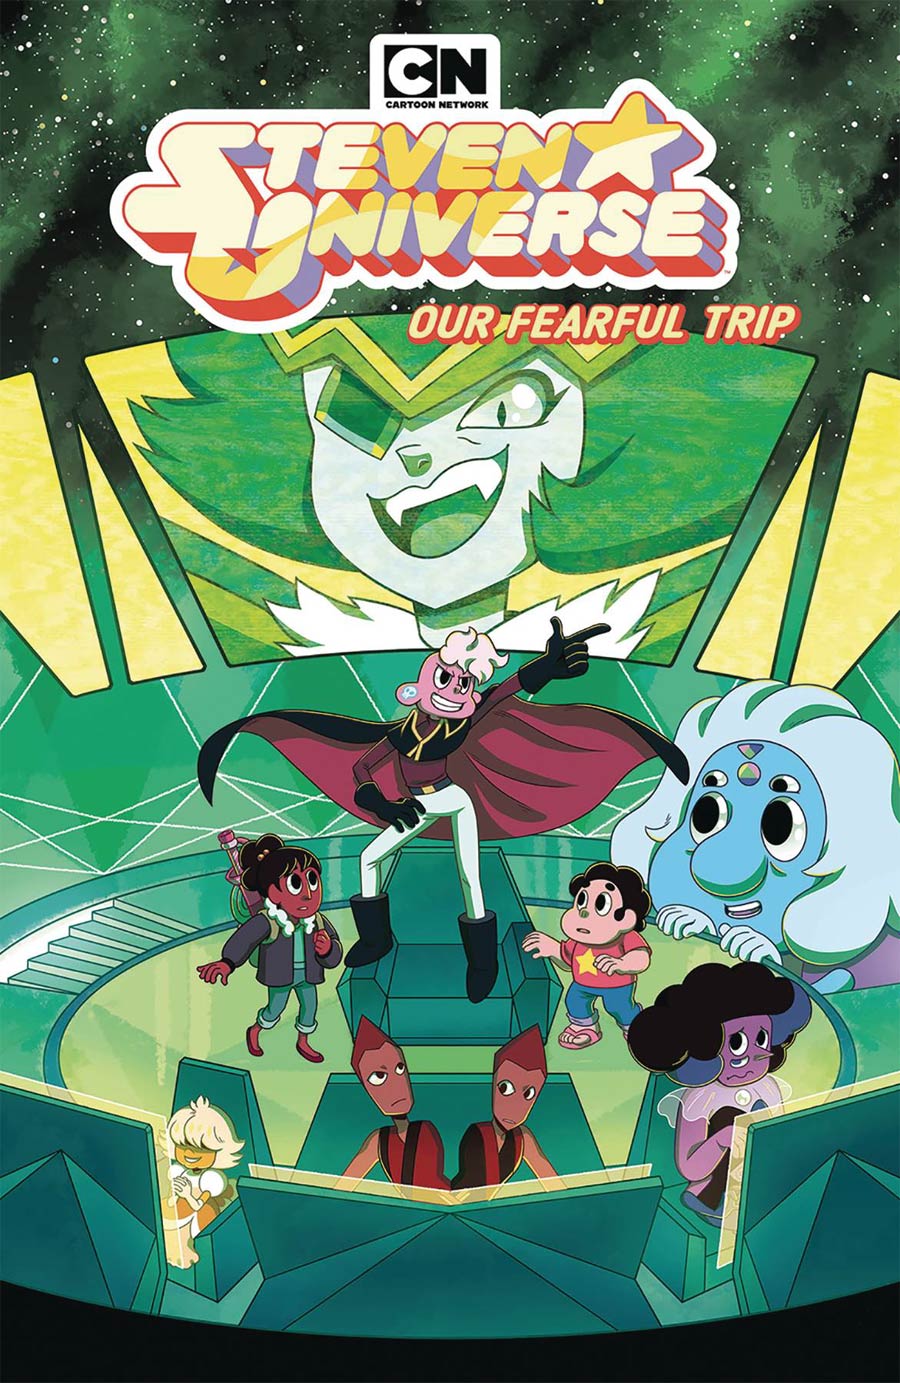 Steven Universe Ongoing Vol 7 Our Fearful Trip TP